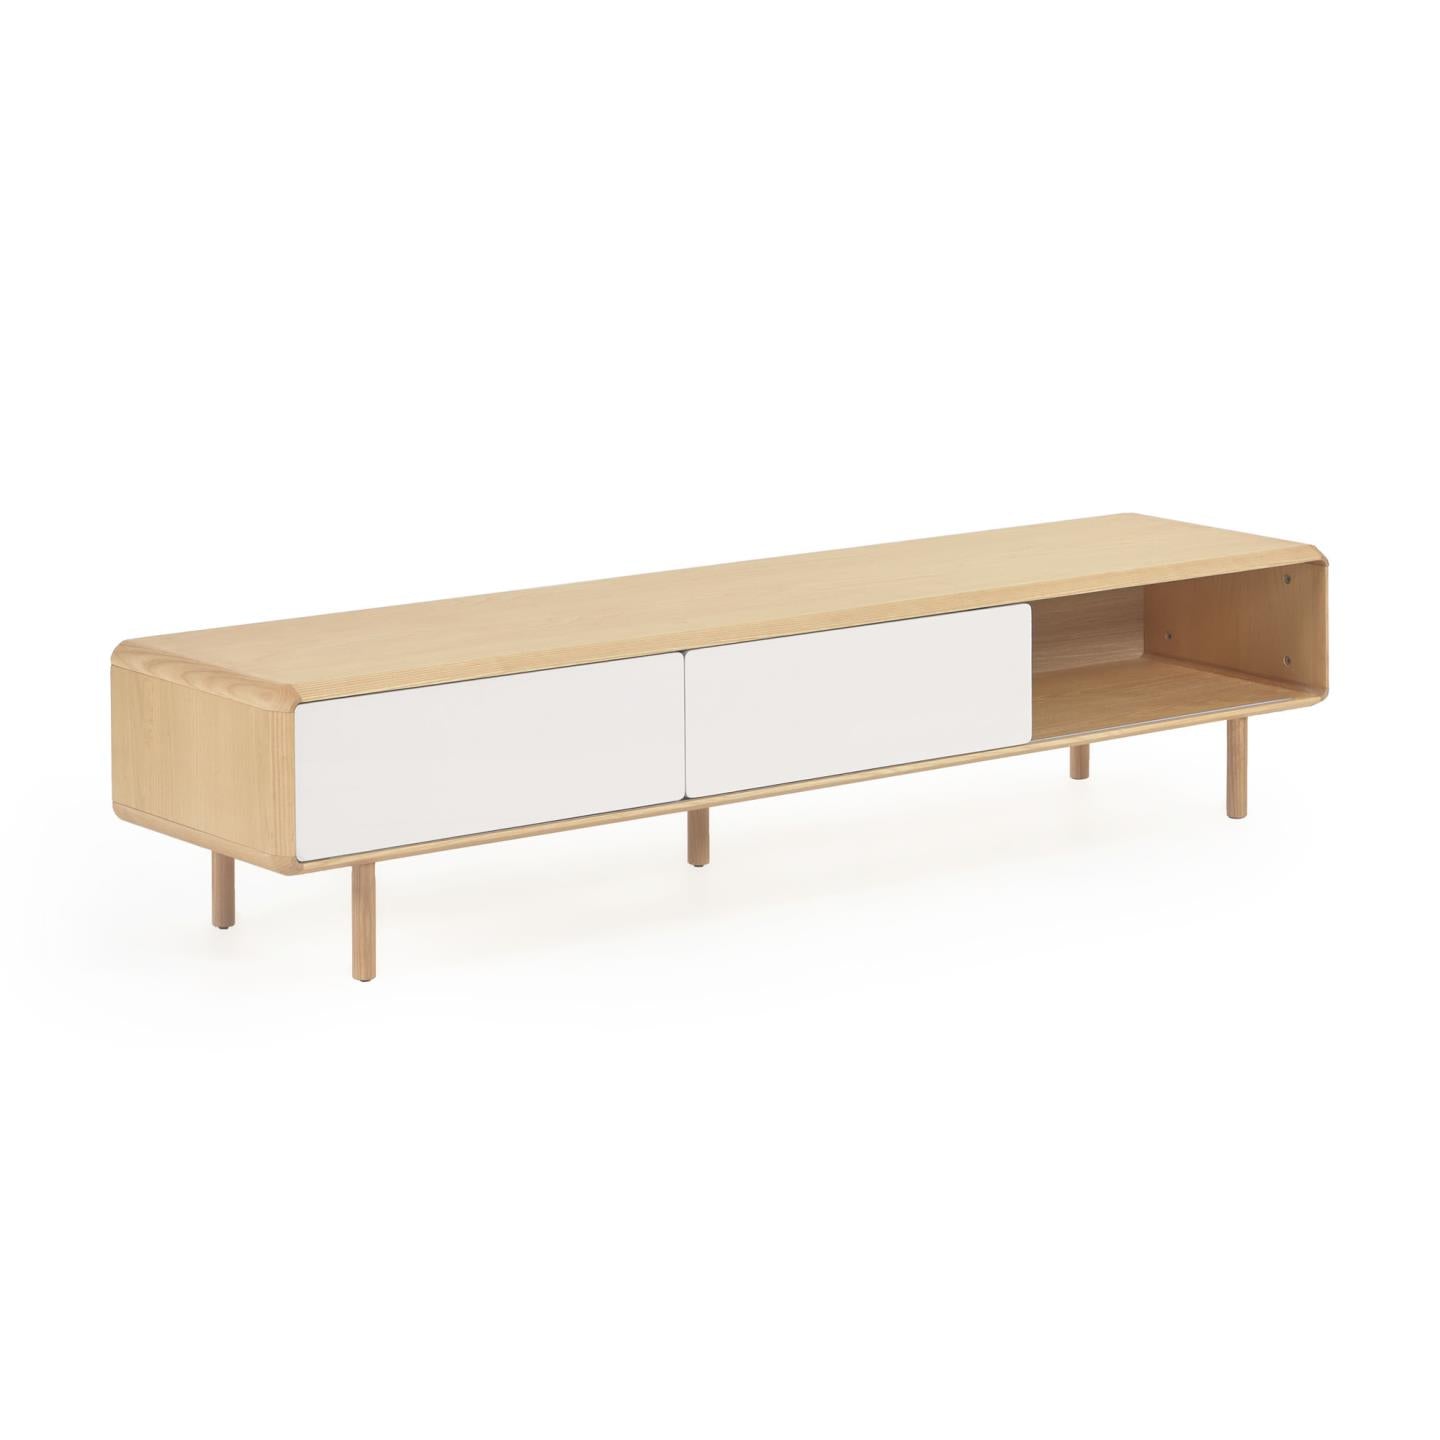 Anielle solid ash & ash veneer TV stand with 2 doors, 180 x 41 cm